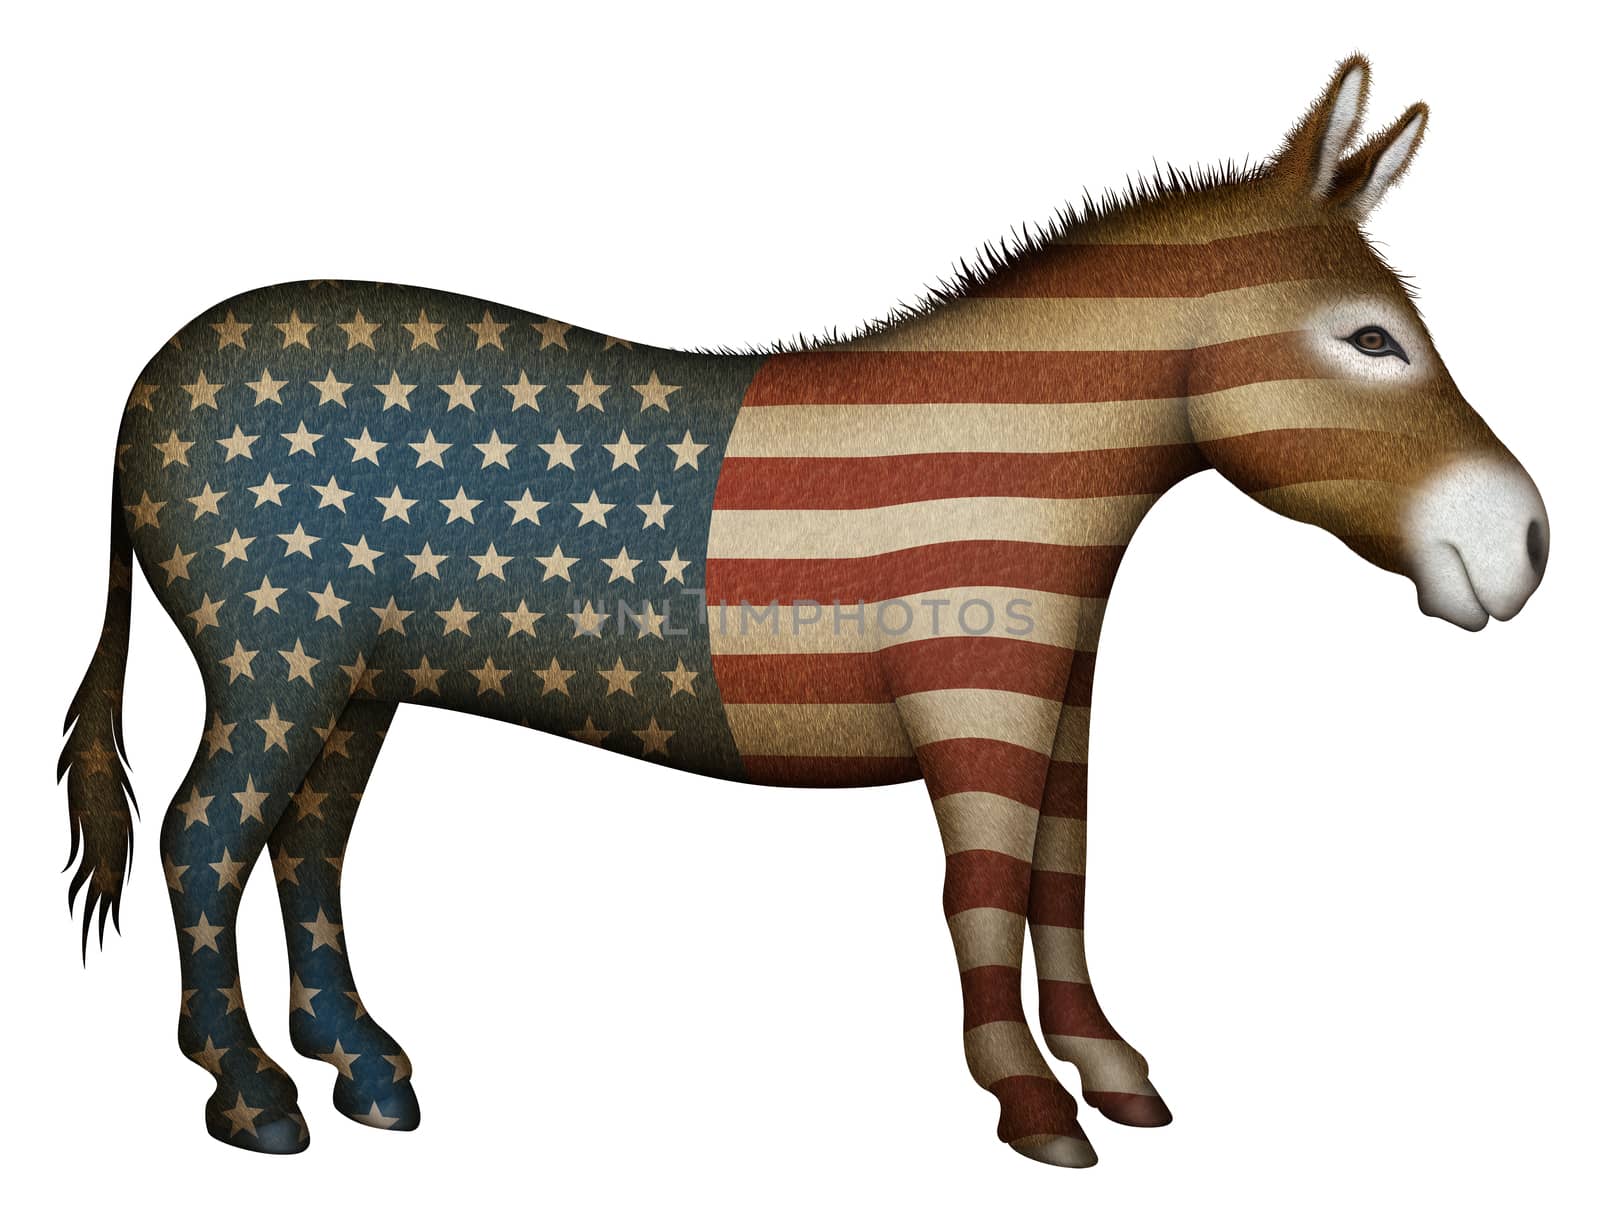 Digital illustration of a donkey overlayed with stars and stripes — side view.